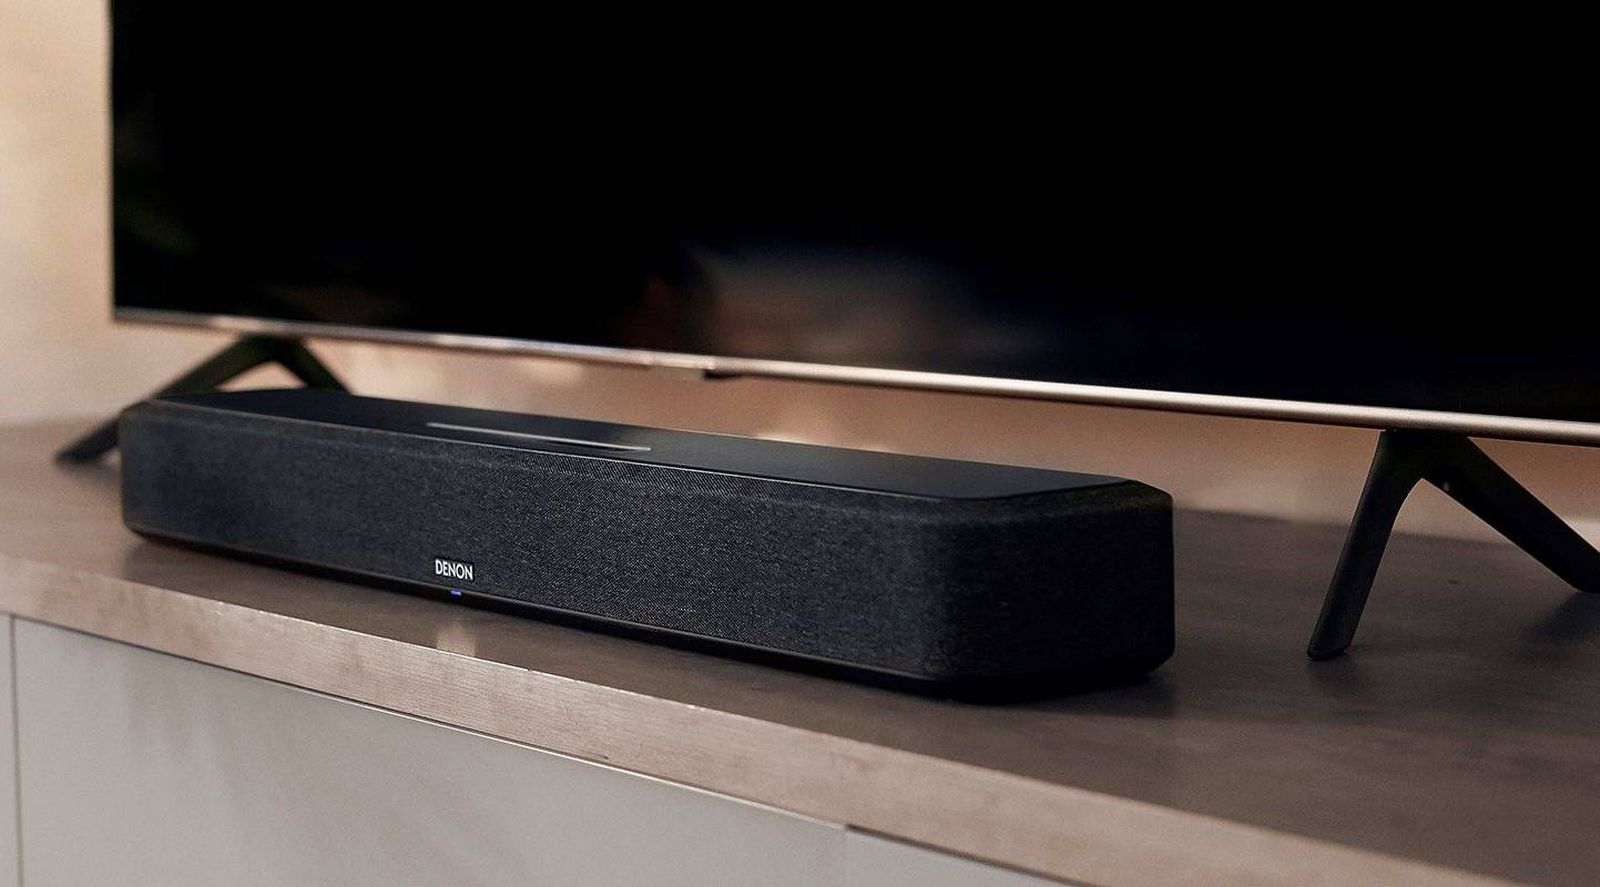 Denon introduces new sound bar with Dolby Atmos, support for AirPlay 2 and more